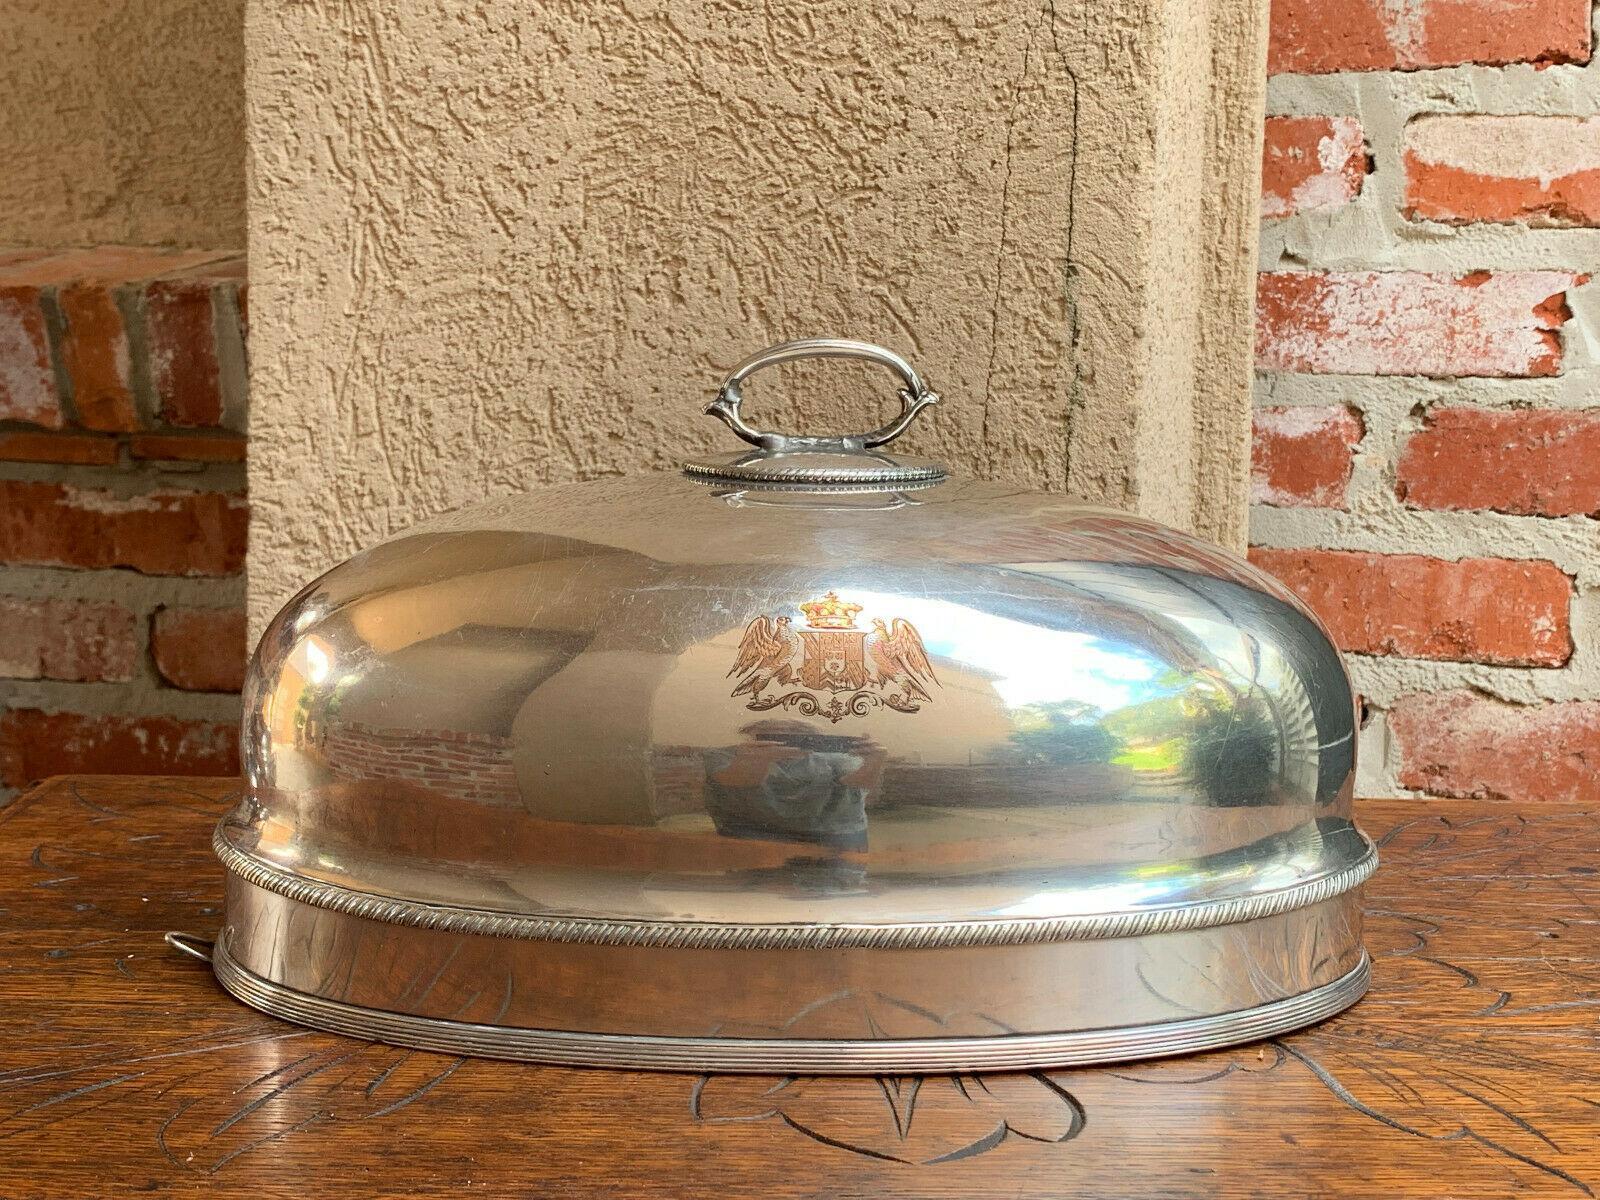 ~Direct from England~
A BEAUTIFUL antique English turkey or meat dome cover!!!
Originally, these stunning domes were used for food presentation back in the 18th and 19th century, traditionally covering turkey/meat sitting on a large oval